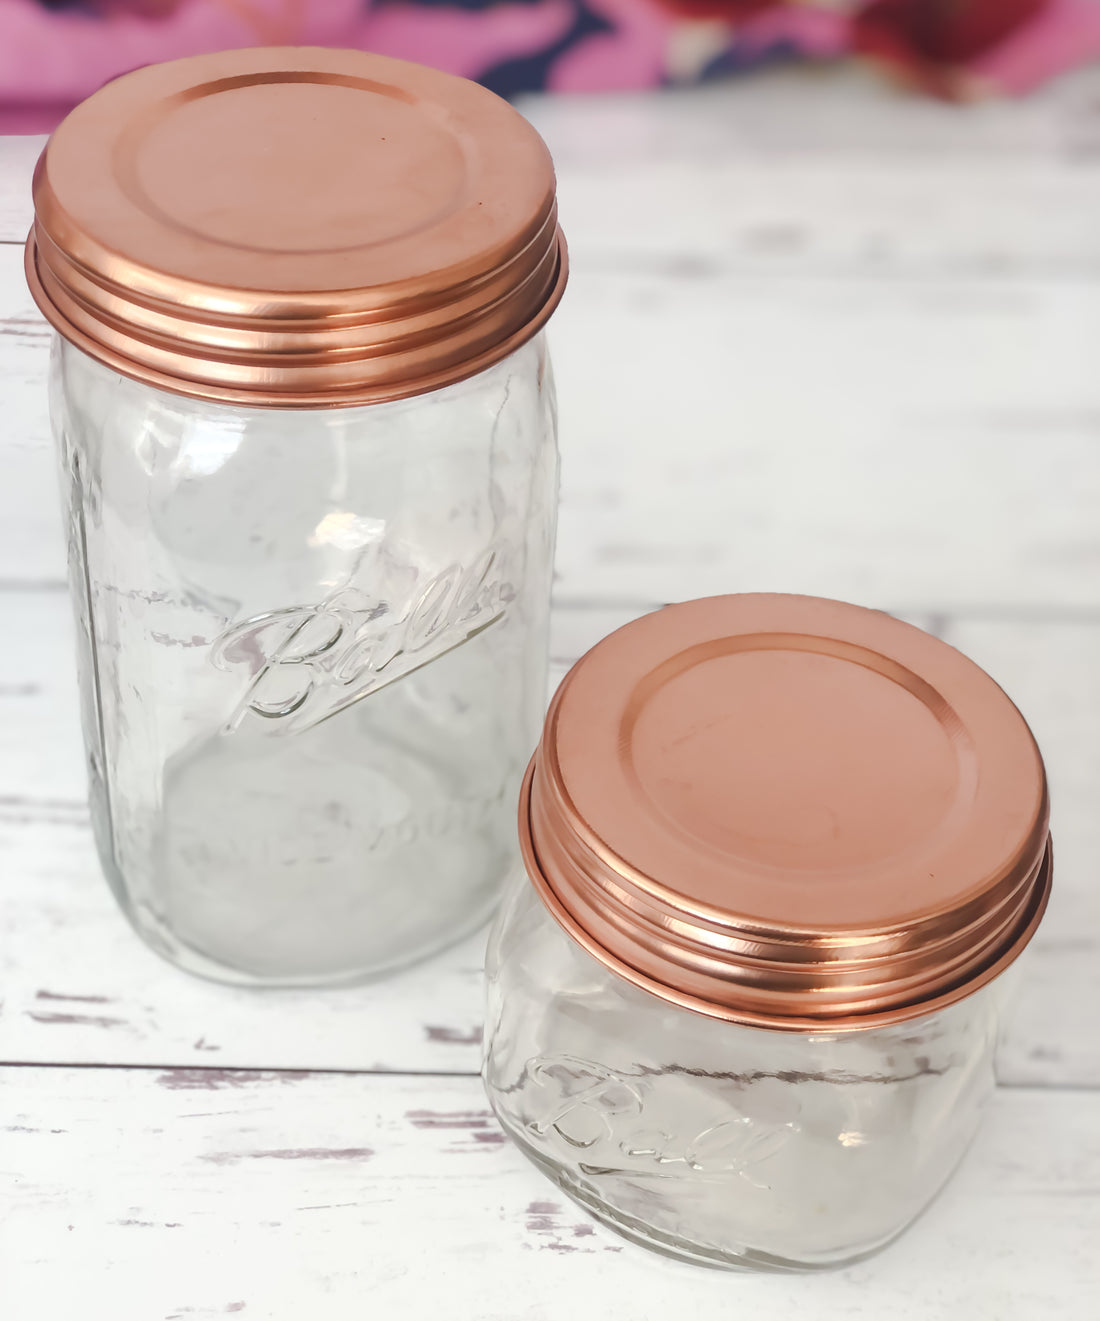 Rustic Copper Finish Mason Jar Lids Set of 4 (Wide Mouth - Jars Not Included)